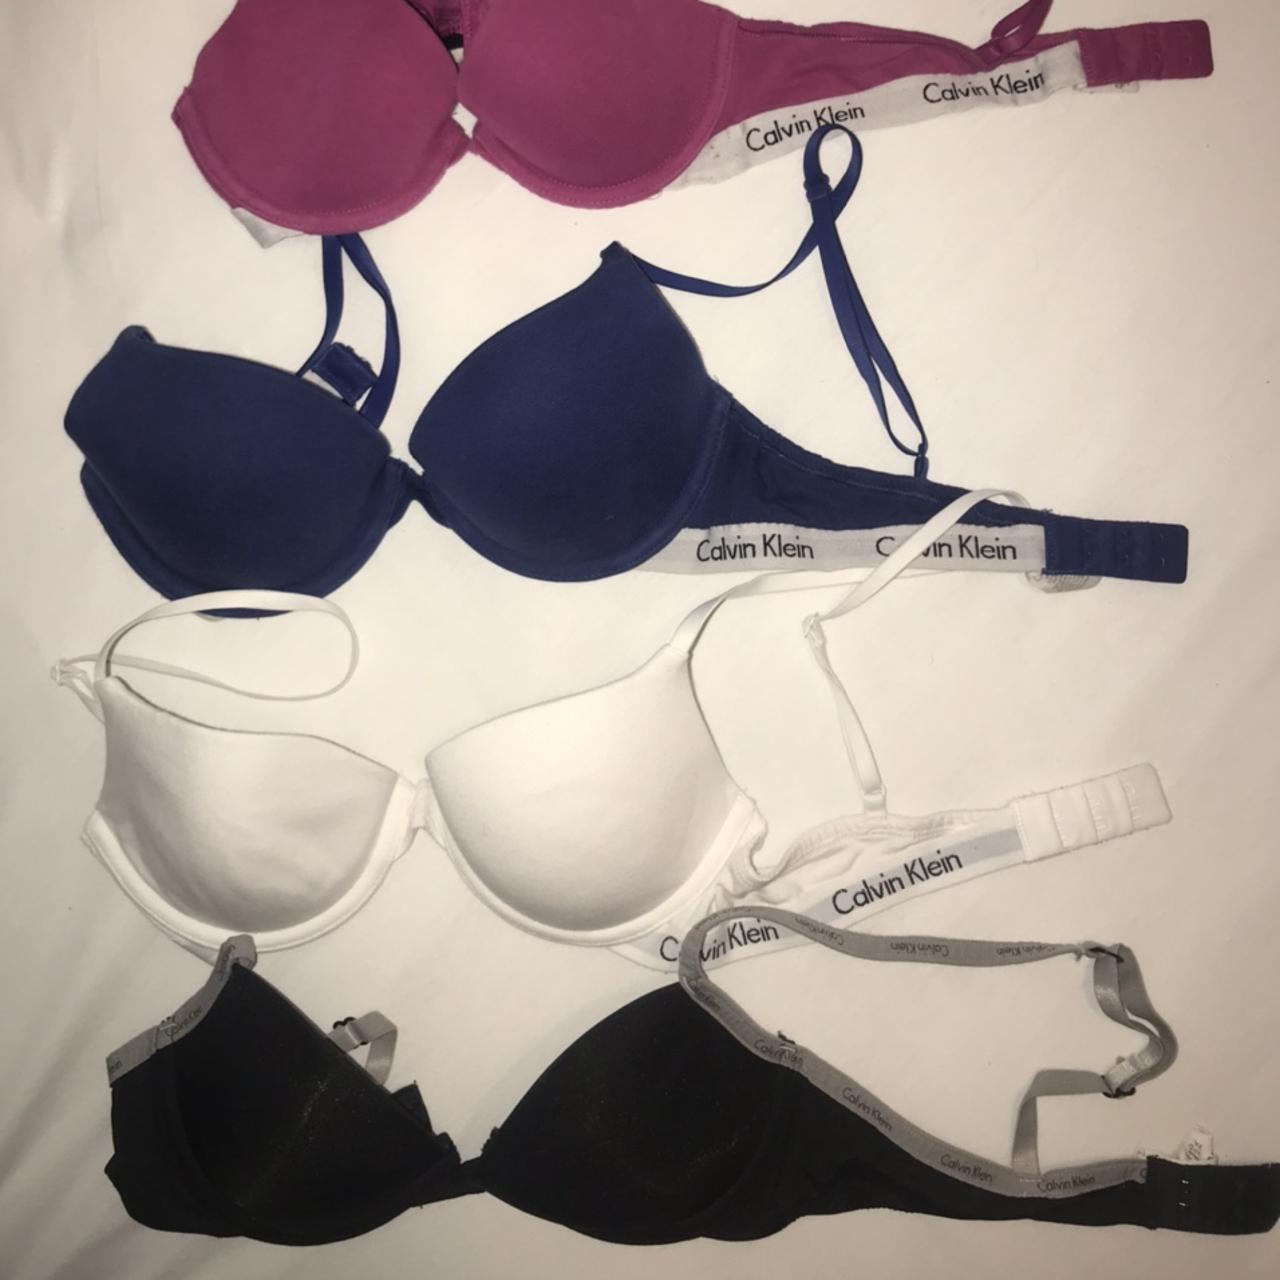 Calvin kelvin bras , Selling because don’t fit